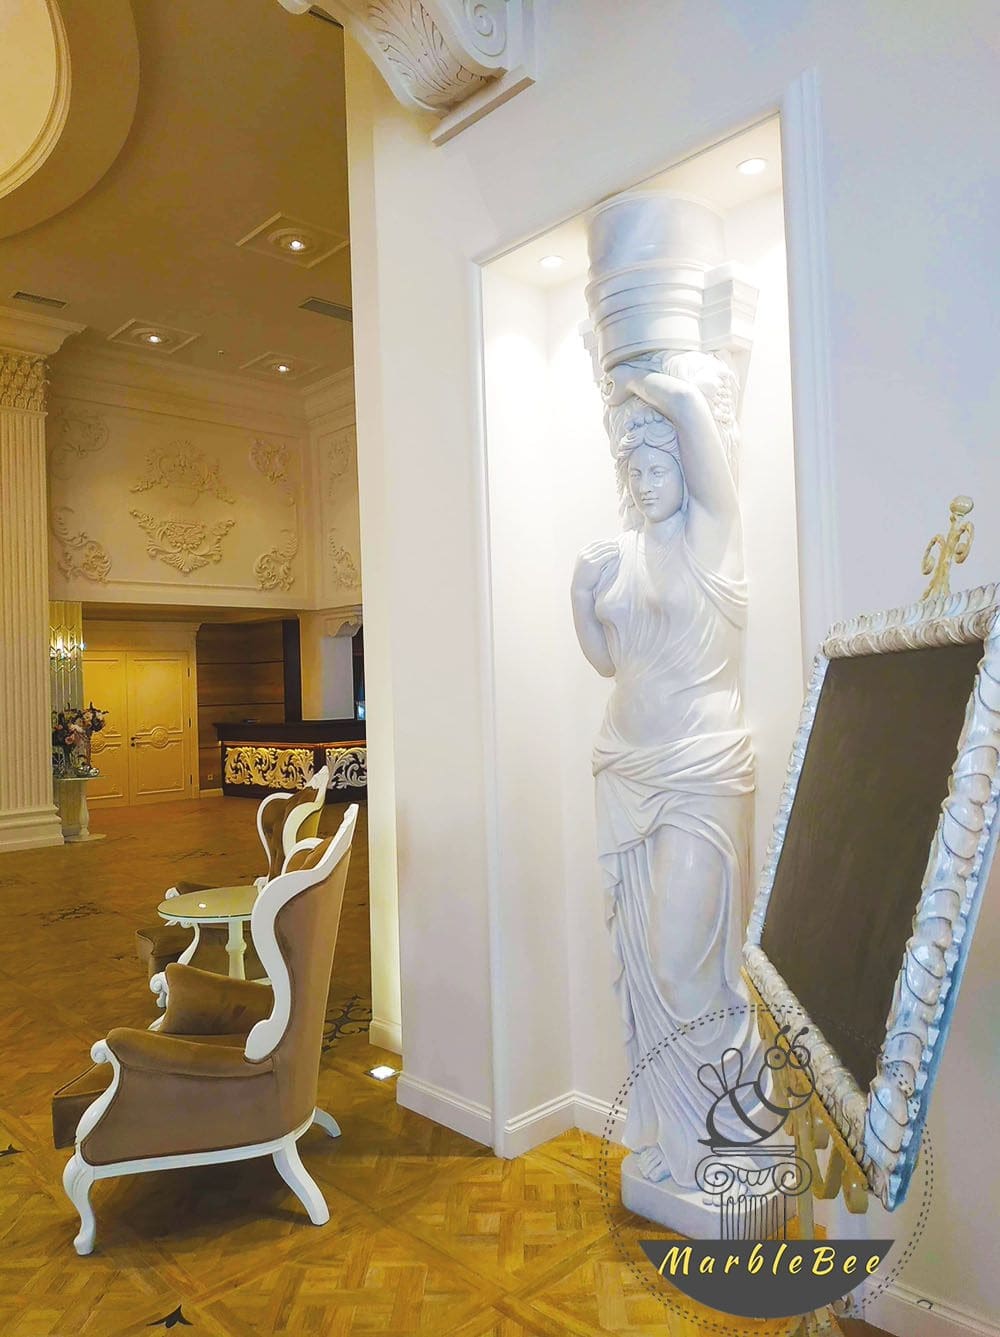 Incorporate marble statues inside the home wherever you can